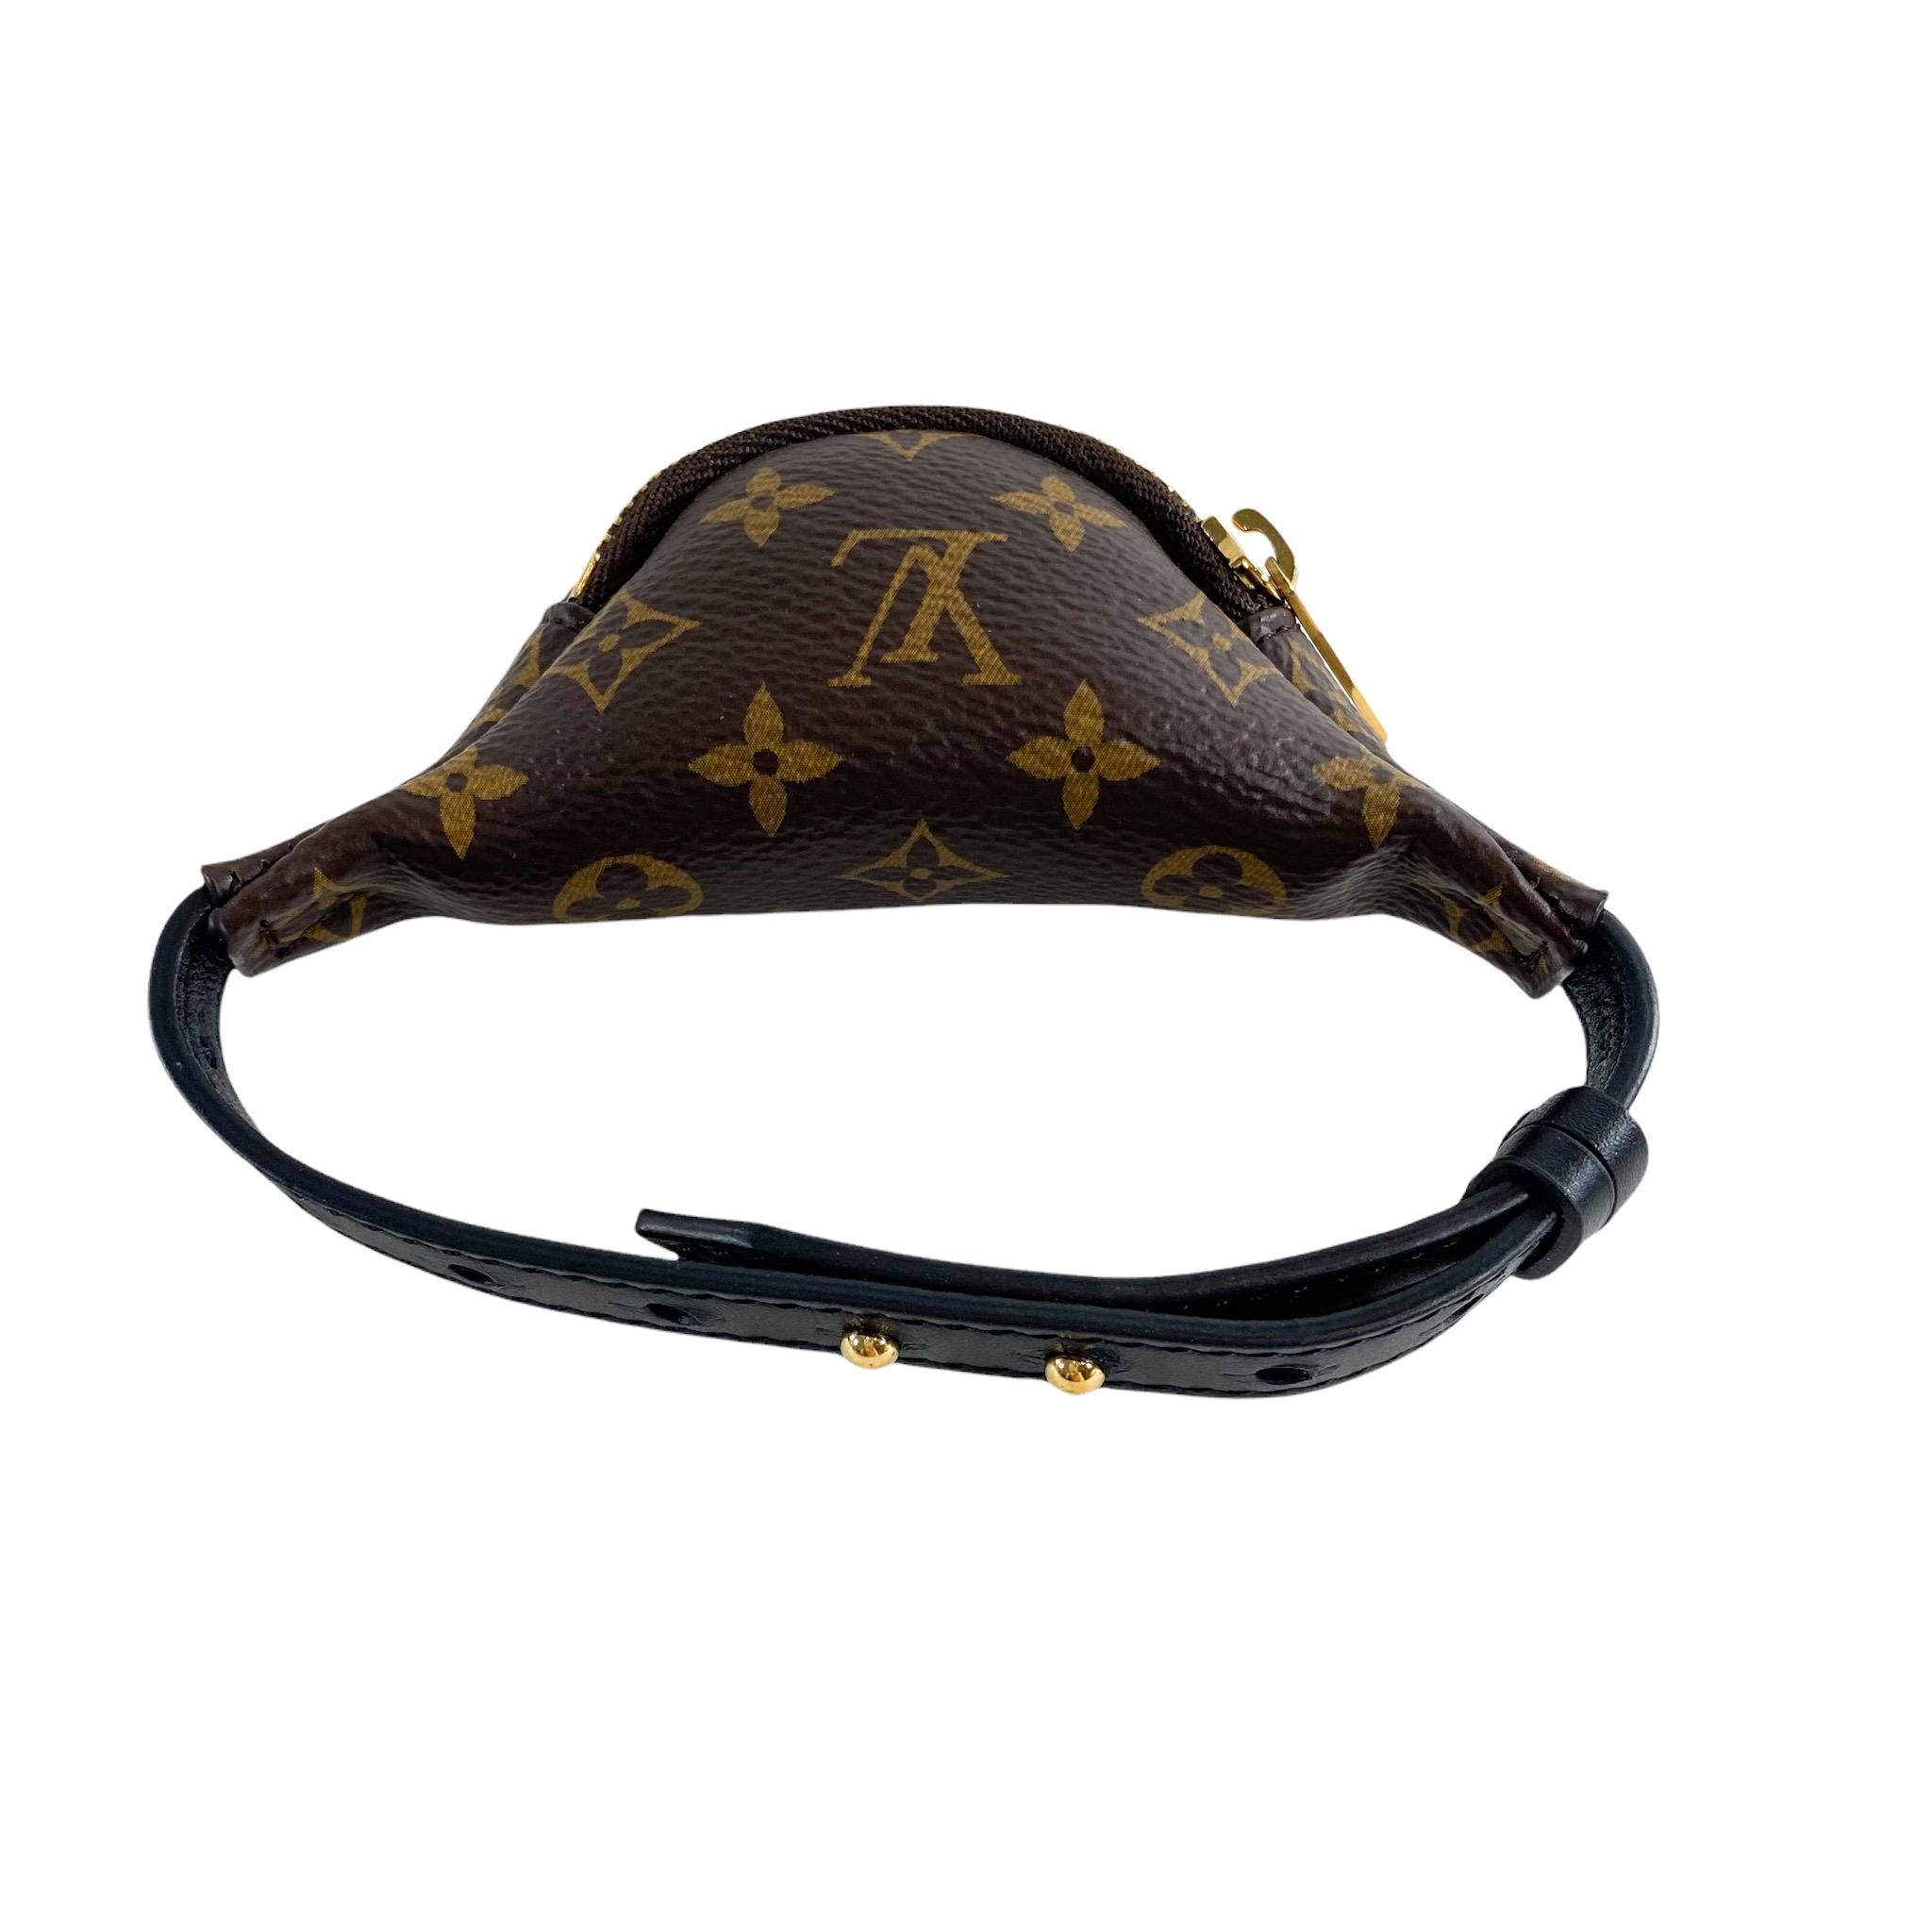 Louis Vuitton Party Bumbag Bracelet In Excellent Condition For Sale In Miami Beach, FL